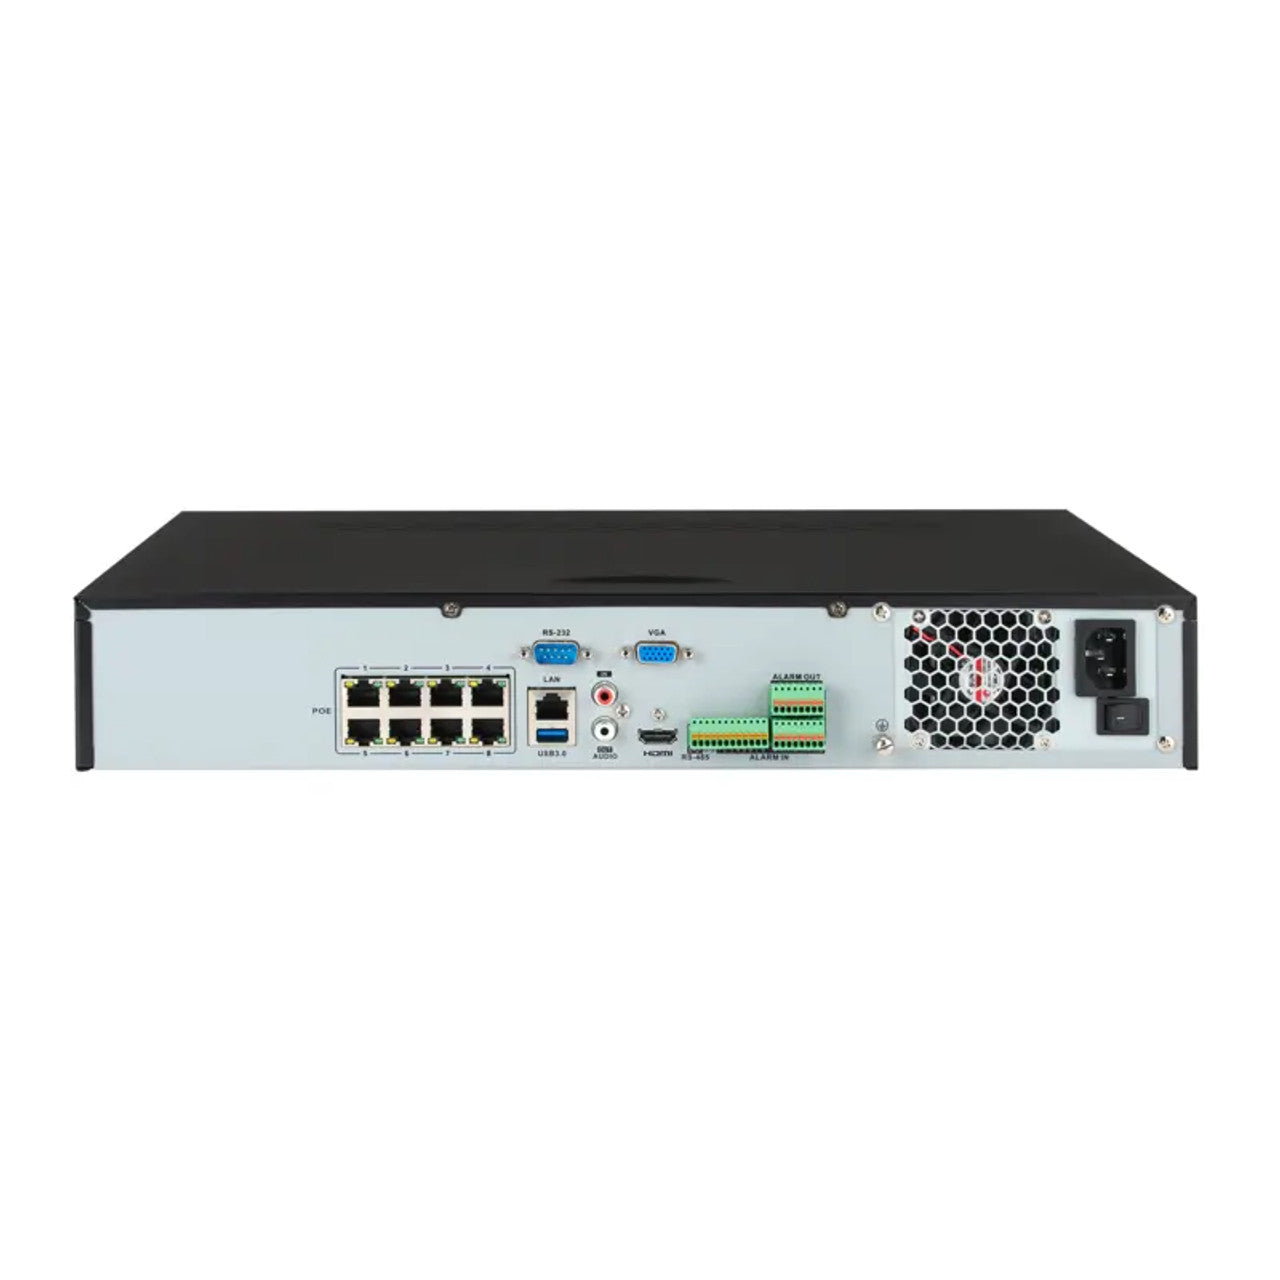 Digital Watchdog DW-VP123T8P 8-channel VMAX IP Plus PoE NVR with 4 virtual channels, 3TB HDD included